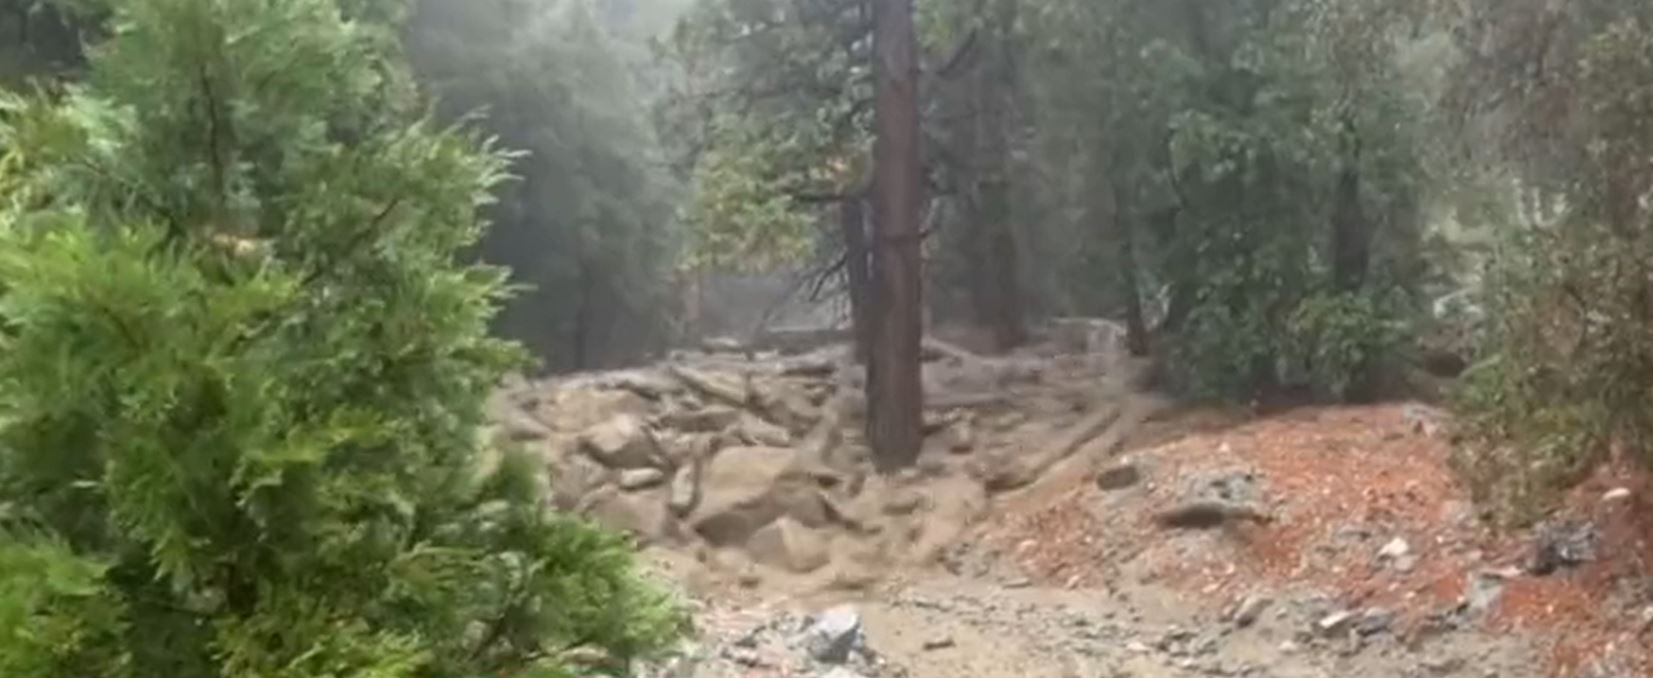 A debris flow triggered by Storm Hilary in Forest Falls, California. Still from a video posted to Twitter.